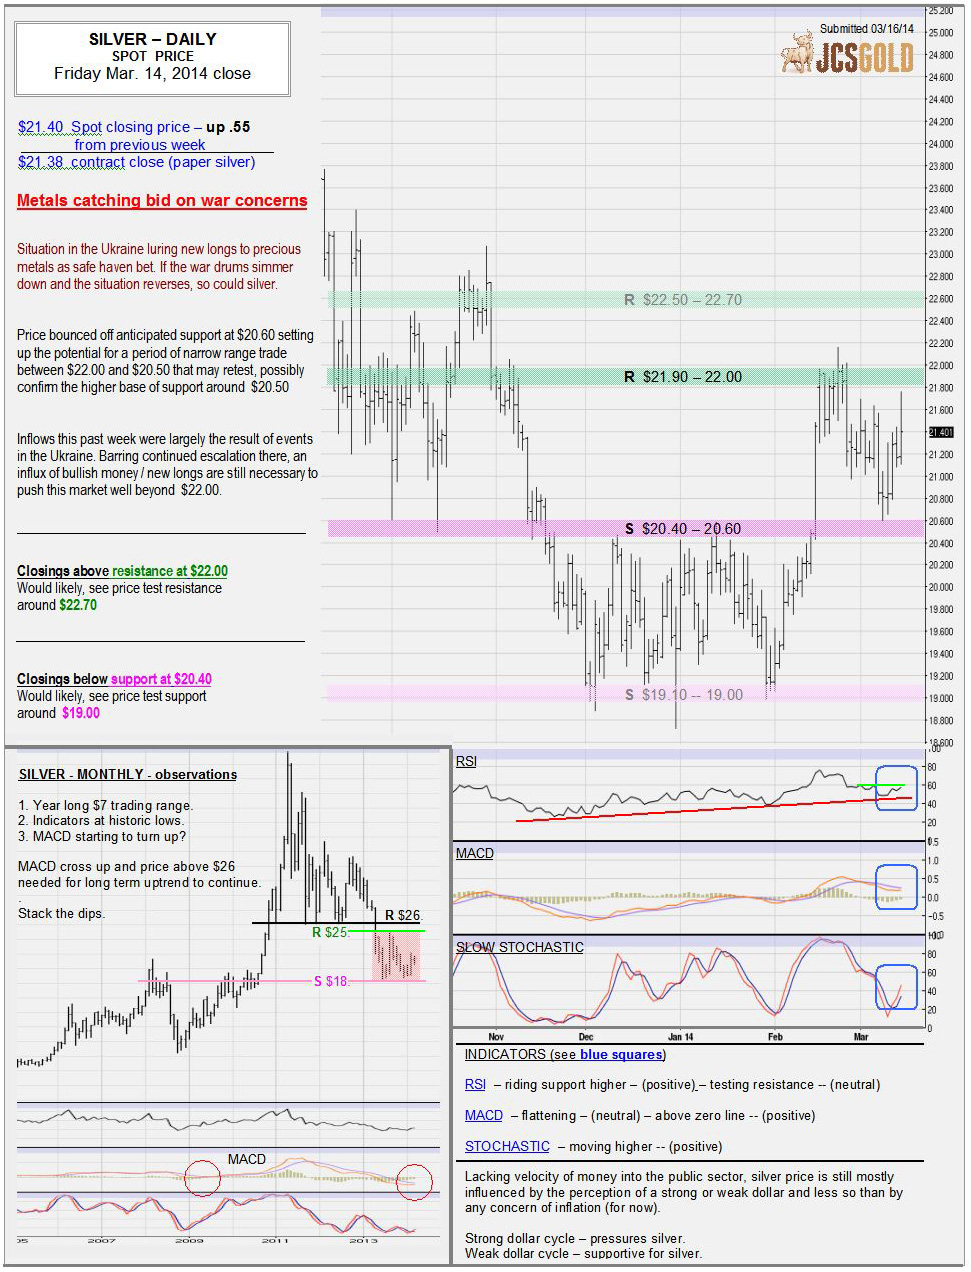 Mar 14, 2014 chart & commentary